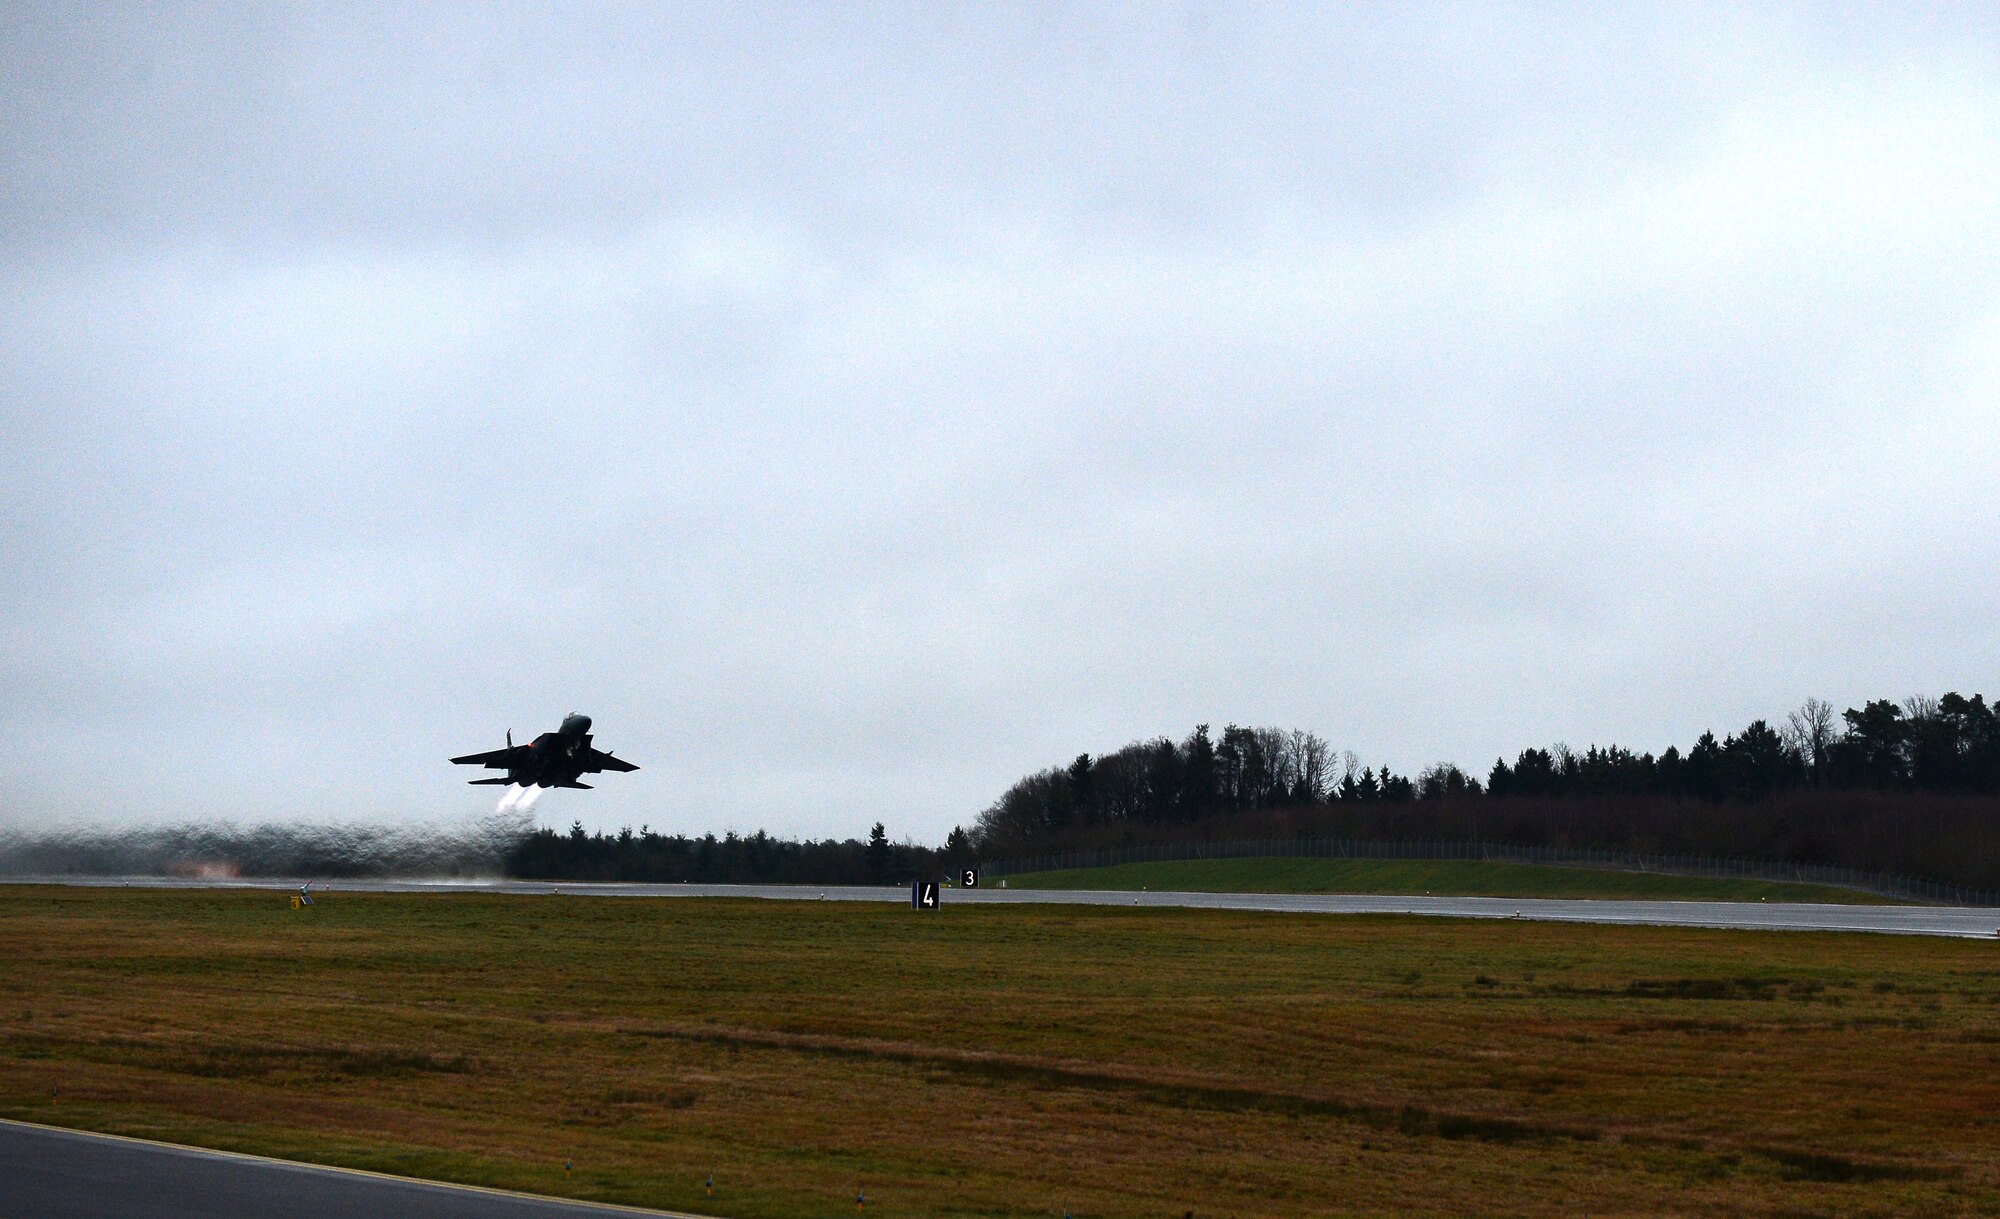 An F-15E Strike Eagle fighter aircraft assigned to the 494th Fighter Squadron at Royal Air Force Lakenheath, England, takes off from the runway during exercise Iron Hand 15-2 at Spangdahlem Air Base, Germany, Dec. 18, 2014. The exercise focused on suppression of enemy air defenses tactics which limits enemy air defenses to allow military assets greater freedom of movement in hostile environments. (U.S. Air Force photo by Airman 1st Class Luke Kitterman/Released)   